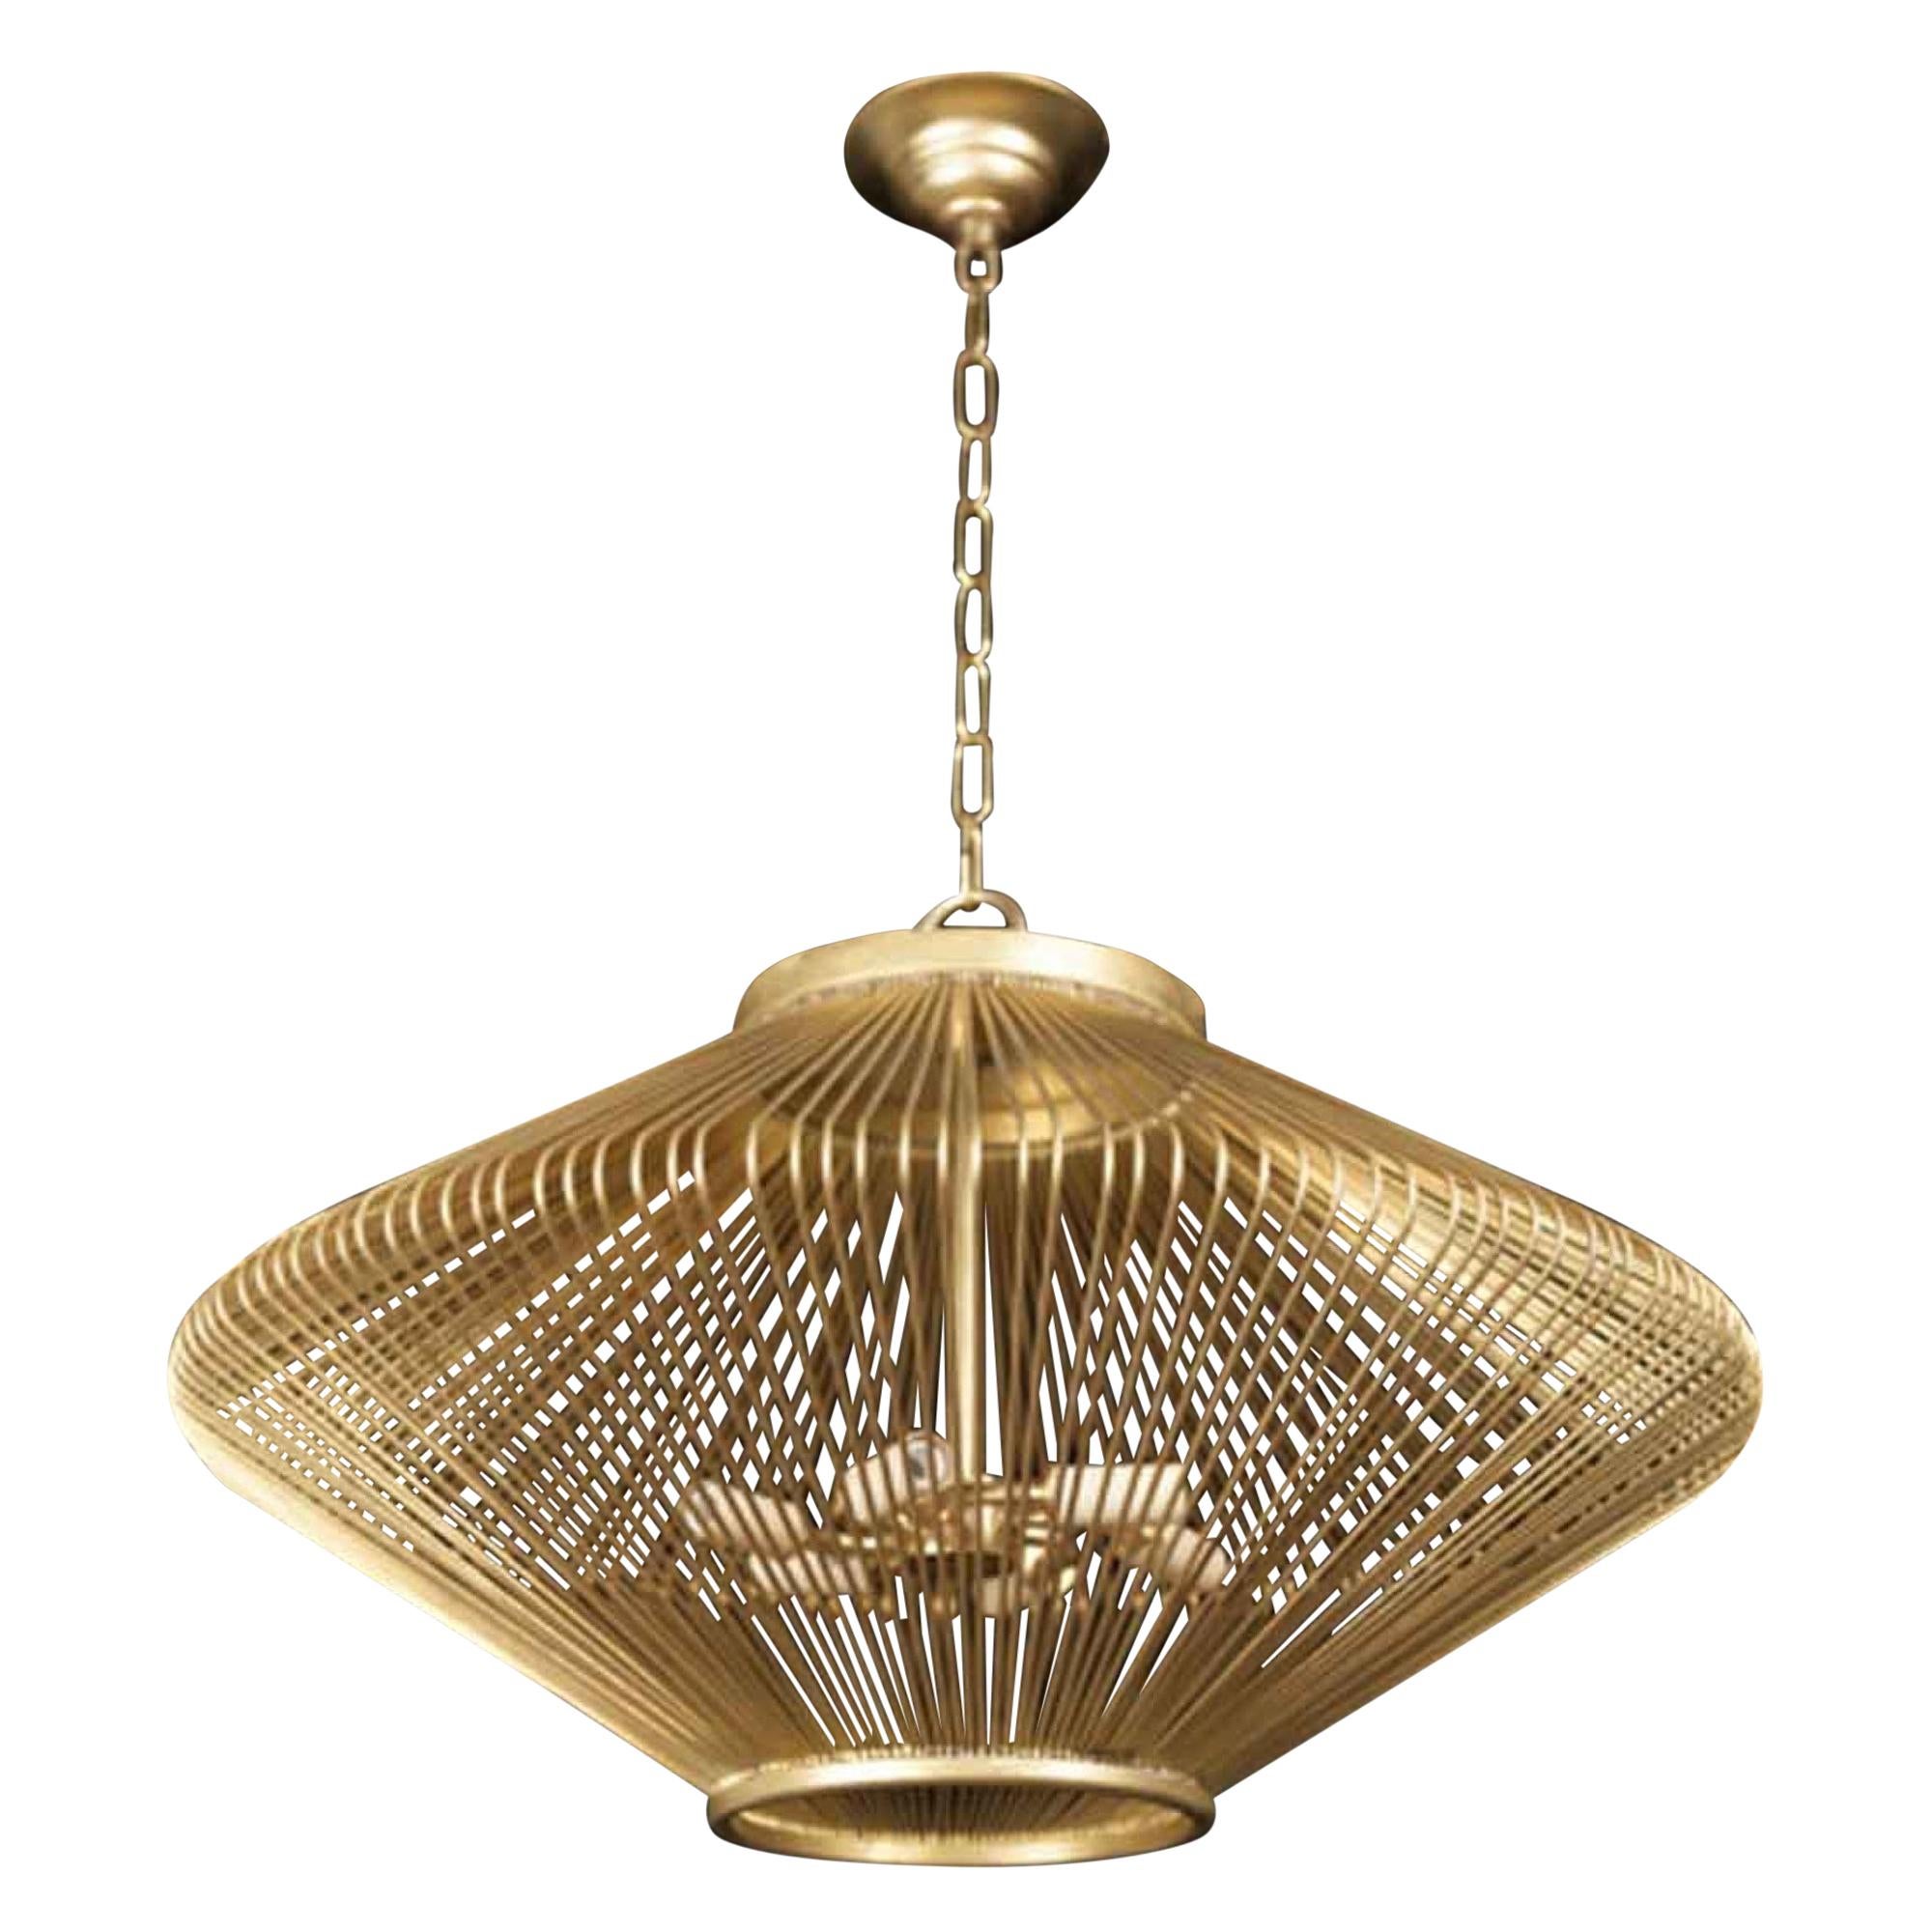 The Moderns Modern Gold Finish Cage Cage Suspension Light